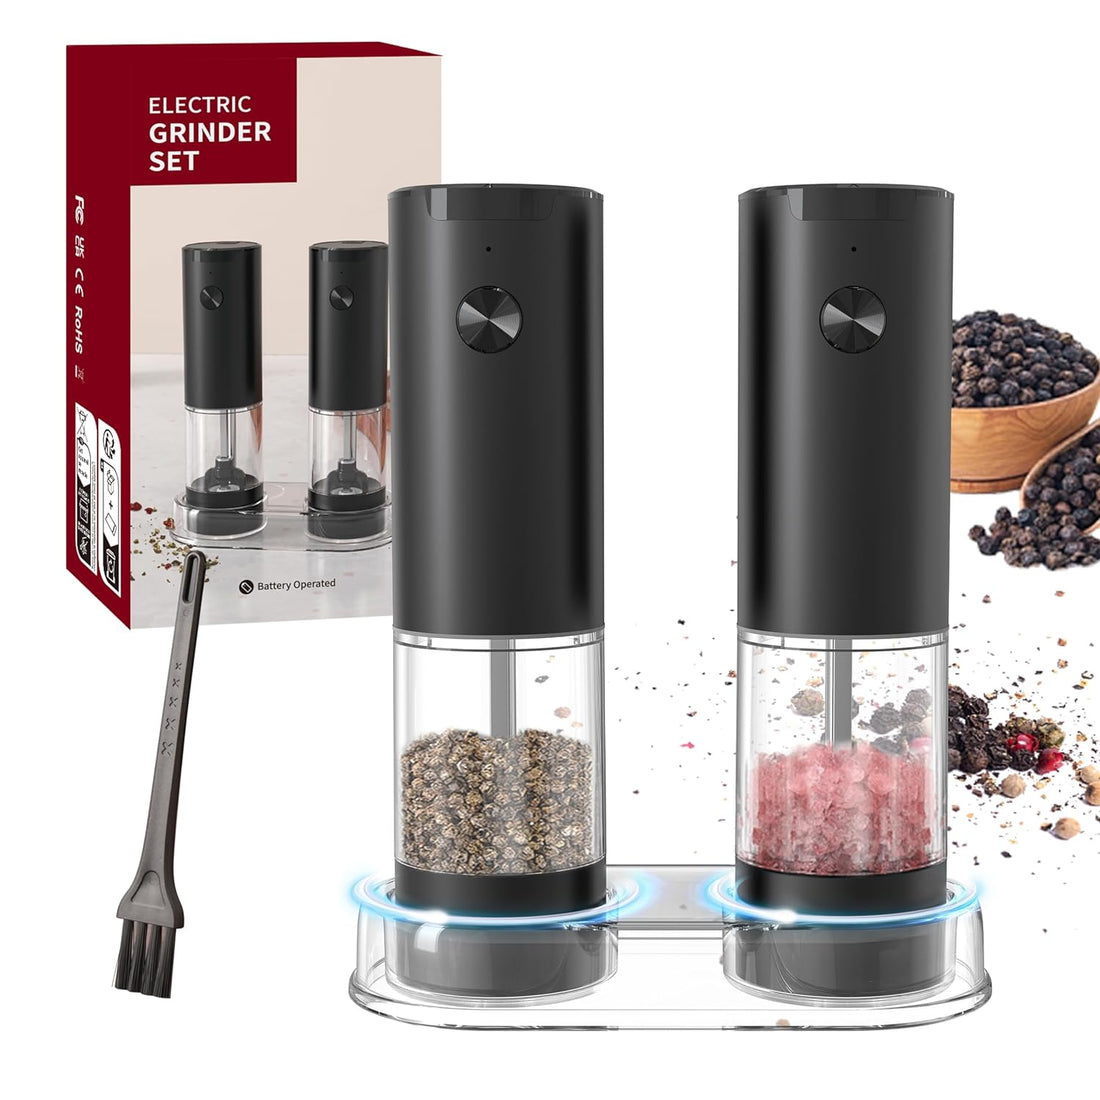 Electric Salt and Pepper Grinder Set, Automatic Mill, Adjustable Coarseness, LED Light - Convenient One-Hand Operation - Perfect for Kitchen and BBQ - Includes Salt and Pepper Shakers (2 Pack)